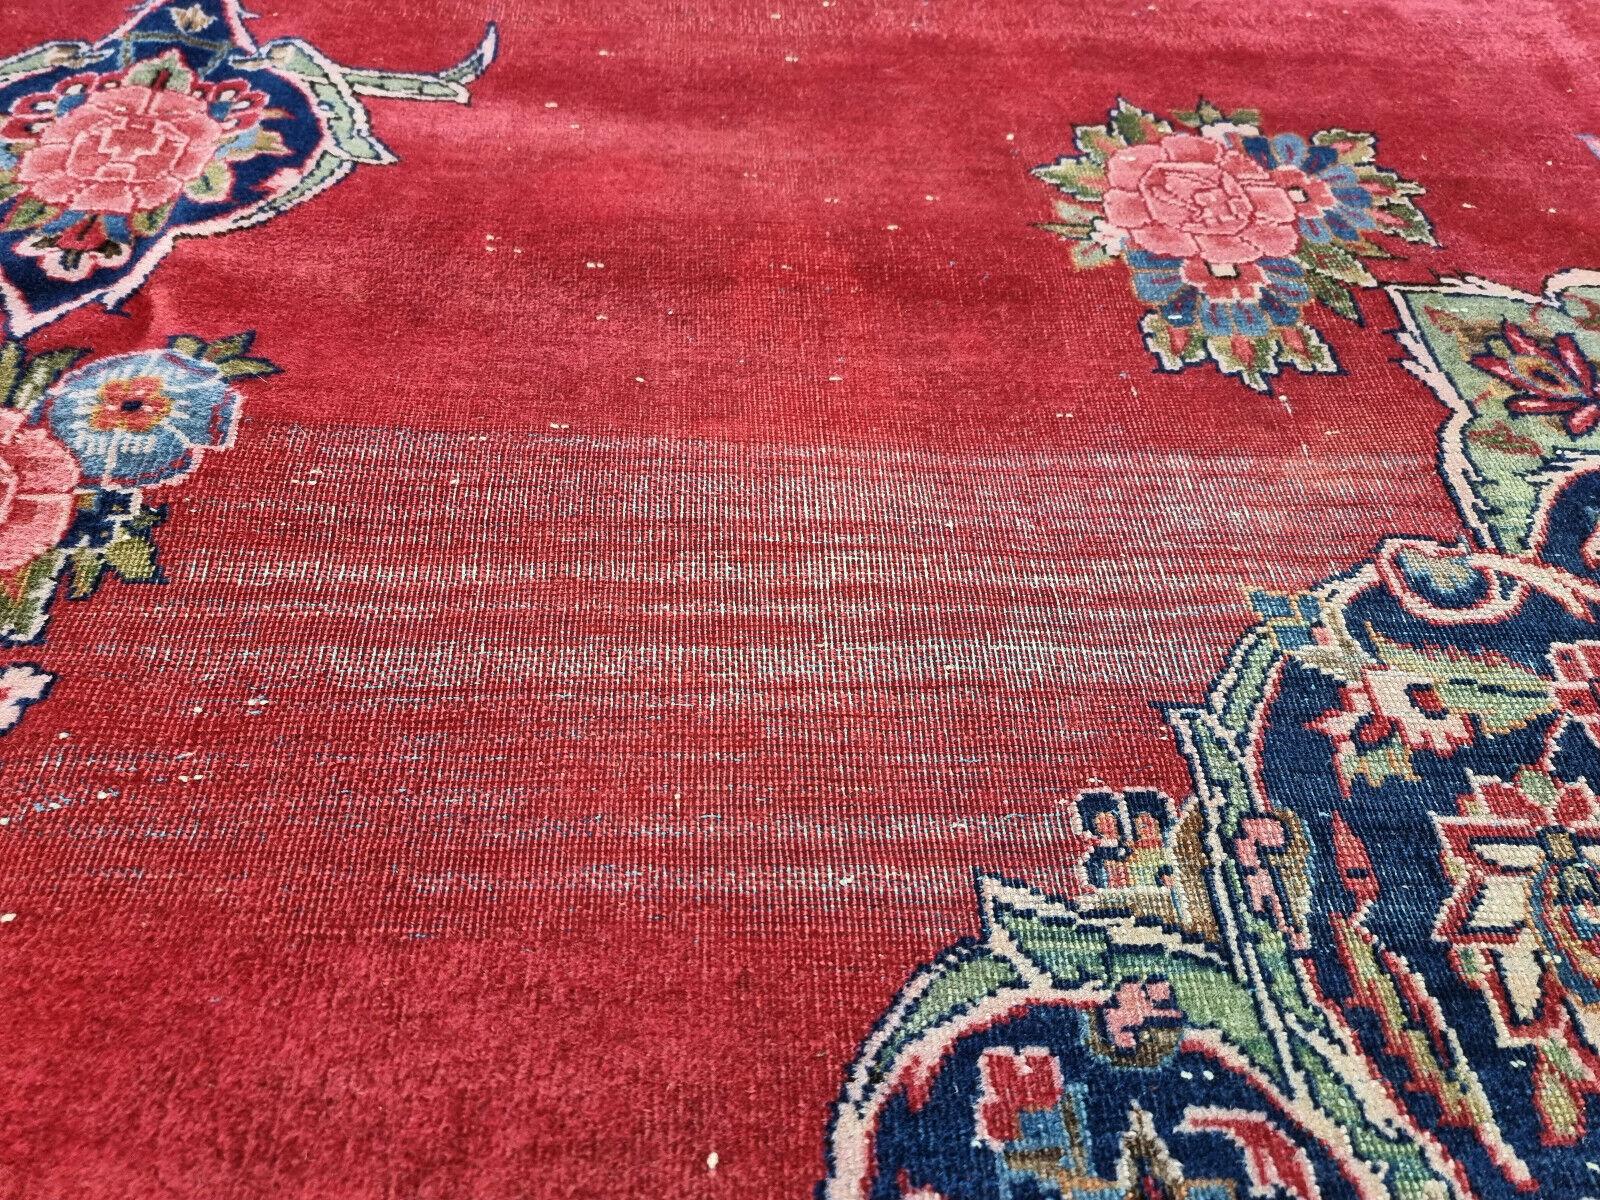 Handmade Antique Persian Style Kashan Distressed Rug 8.5' x 12.9', 1920s - 1D68 For Sale 4